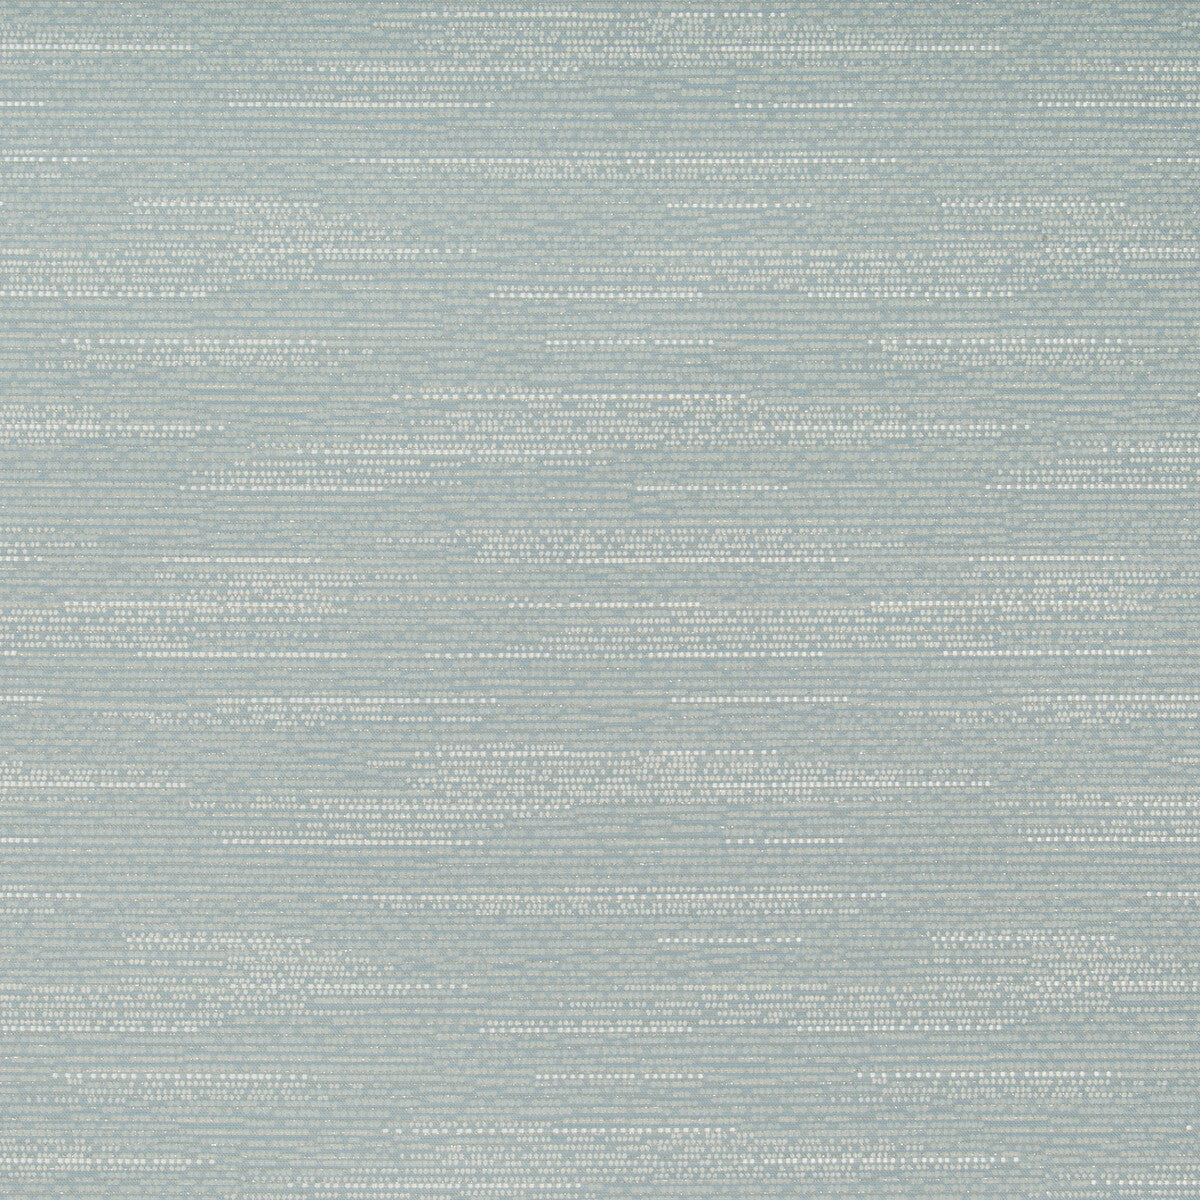 Waterline fabric in mineral color - pattern 32934.15.0 - by Kravet Contract in the Gis Crypton collection